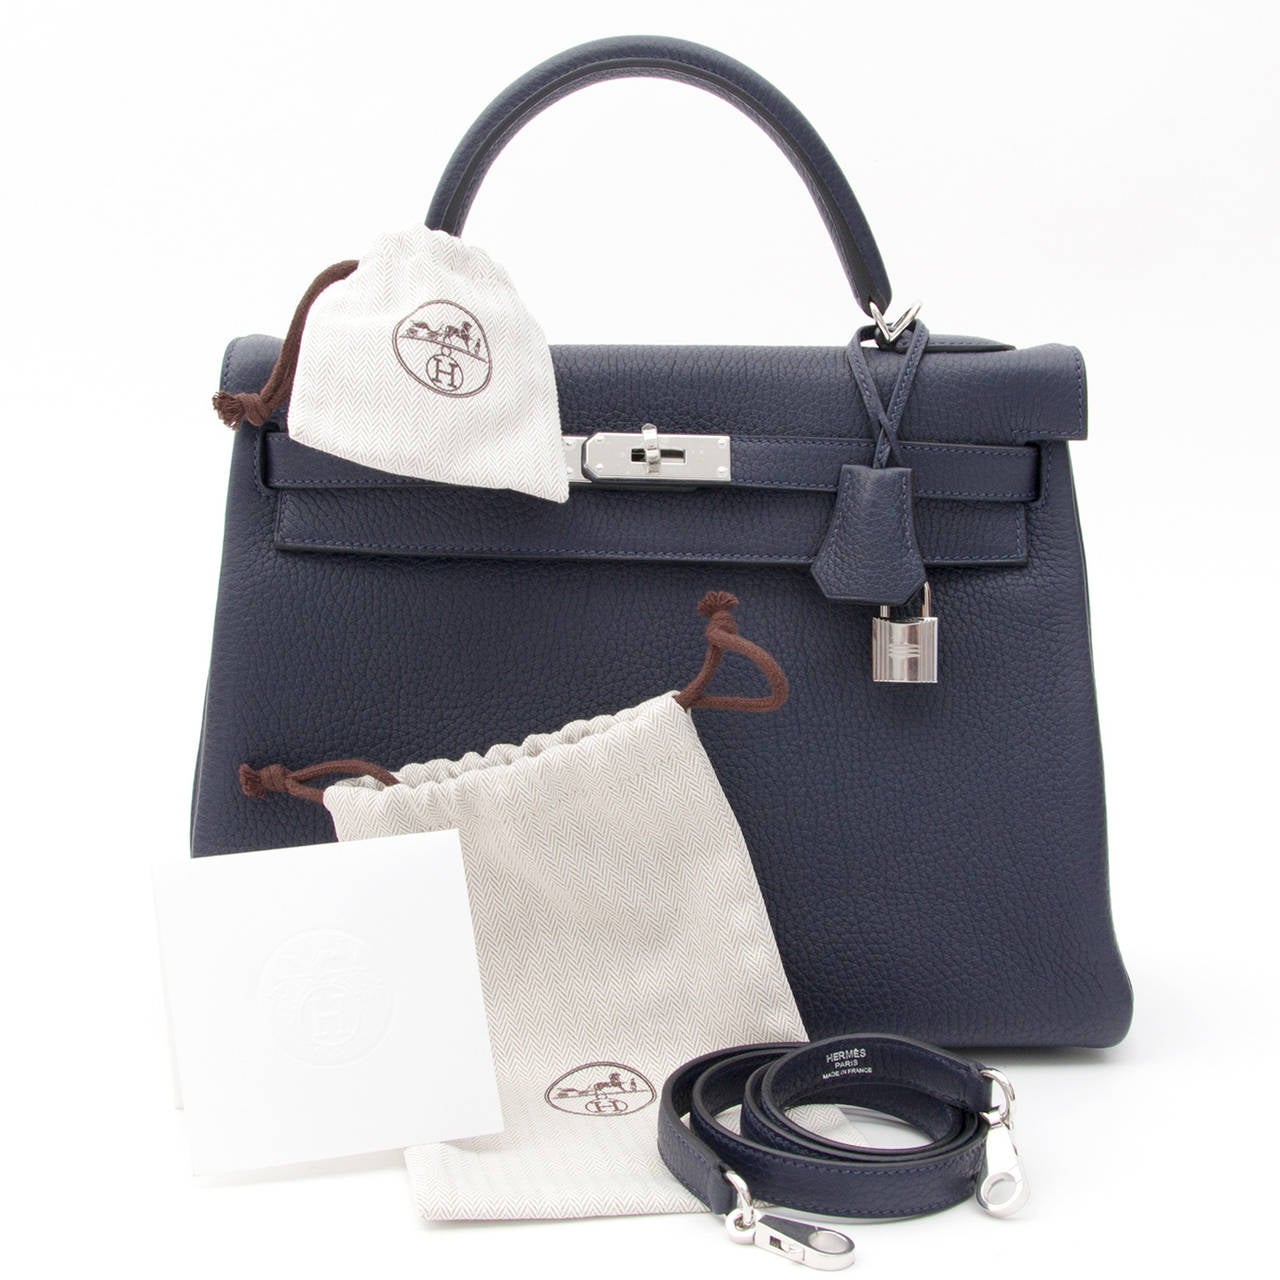 Brand new, storebought Hermès Kelly bag 32 in beautiful 'Blue Nuit' or midnight blue - a deep, rich dark blue hue - in Taurillon Clemence leather. 
Has paladium hardware and comes with clochet cadenas keyholder and padlock. 
Blindstamp 'T' ,